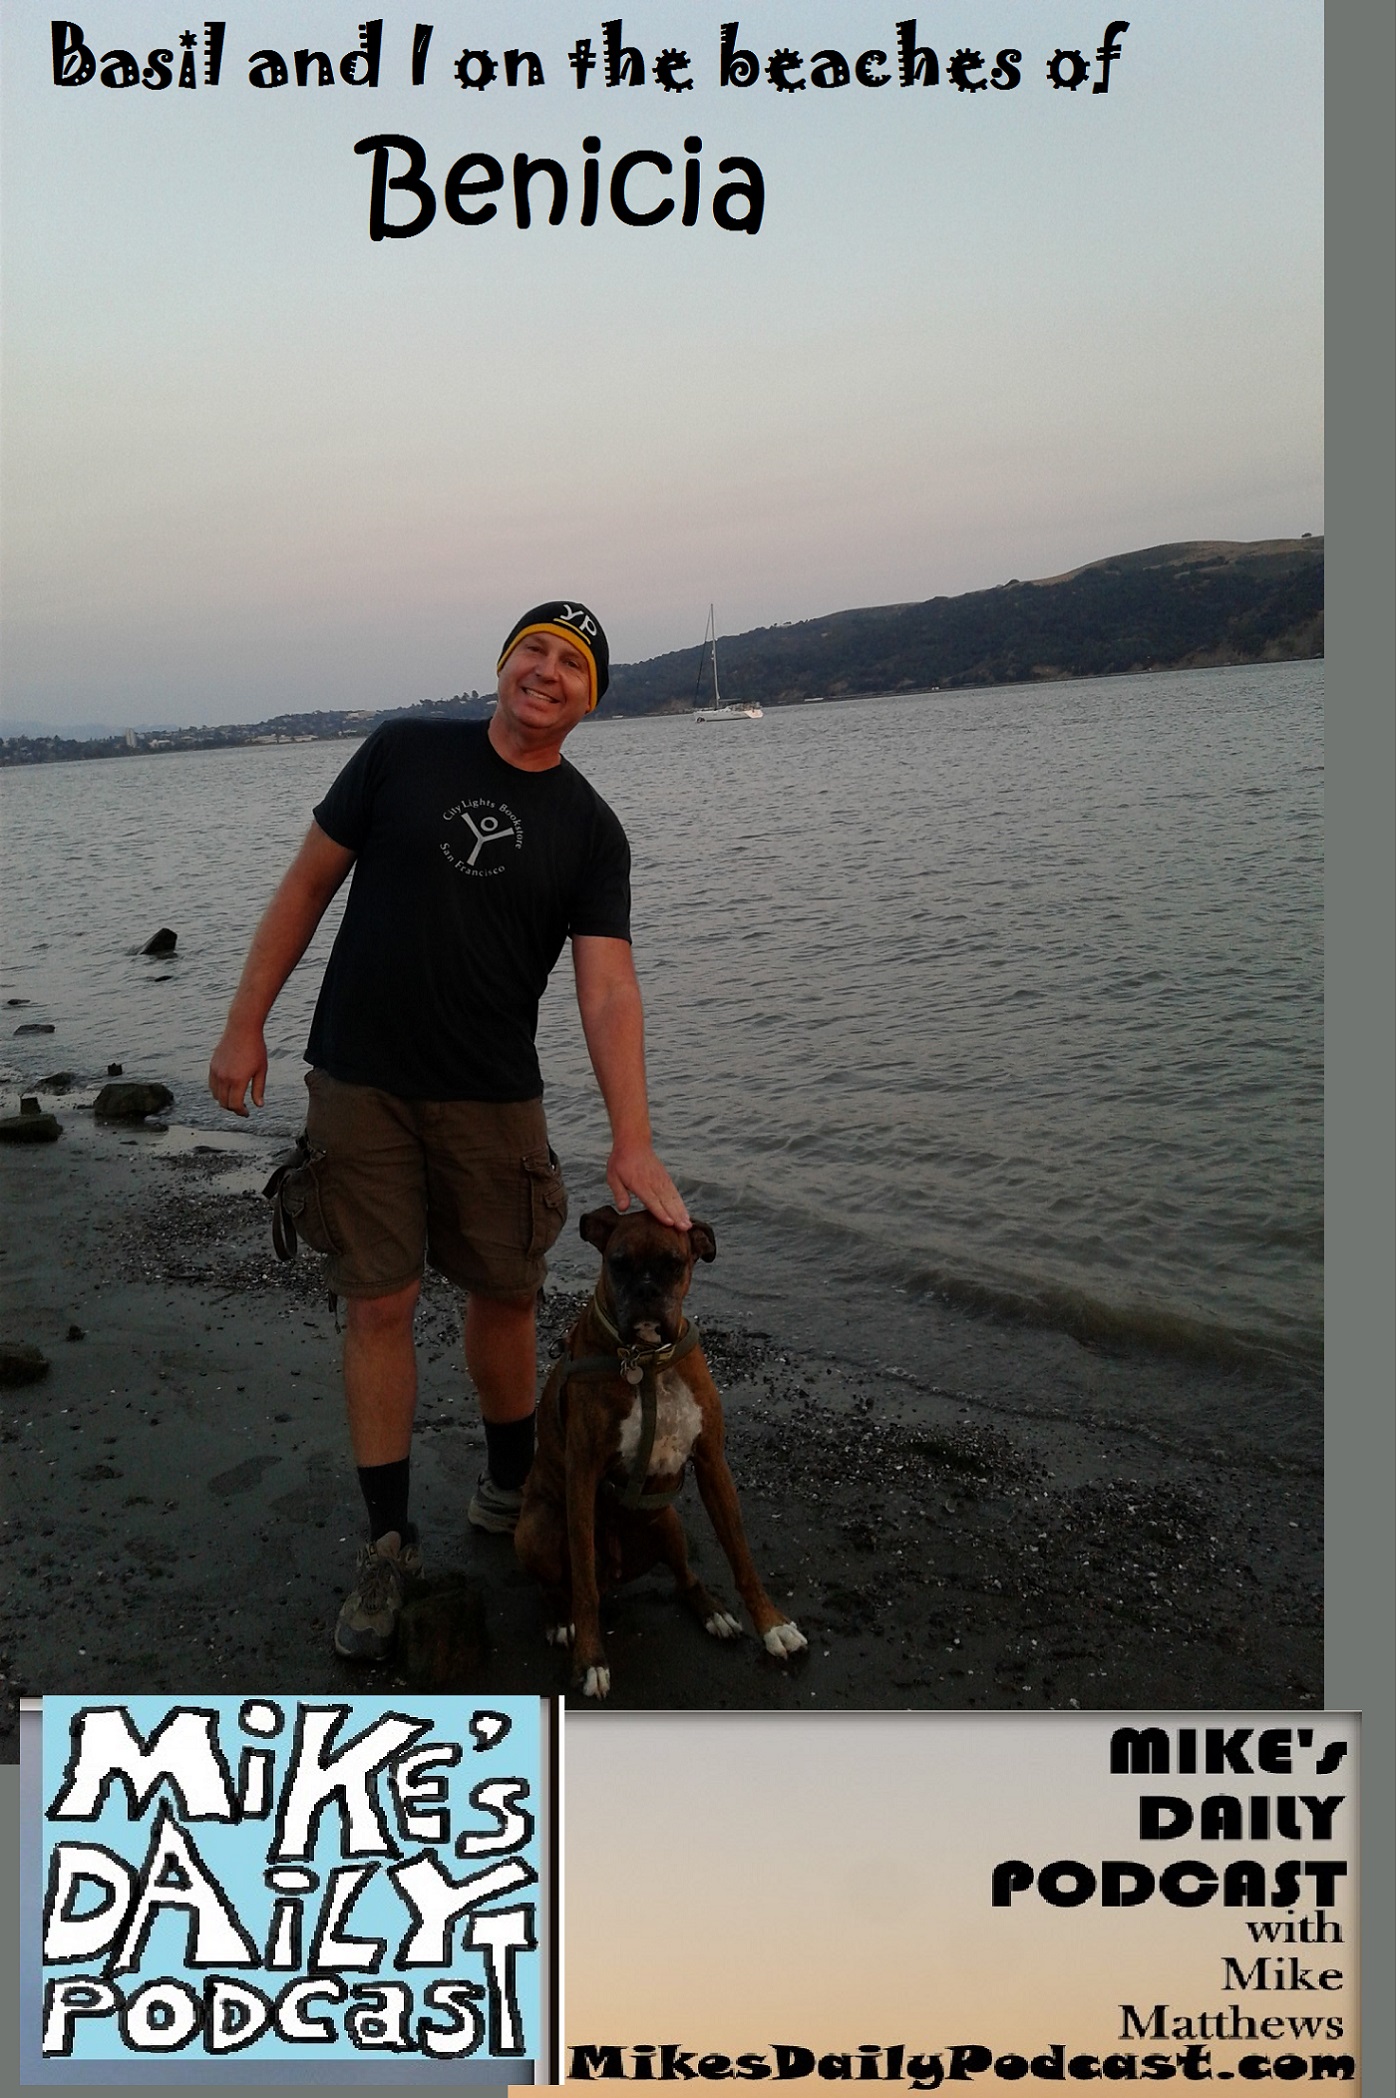 mikes-daily-podcast-1199-downtown-benicia-beach